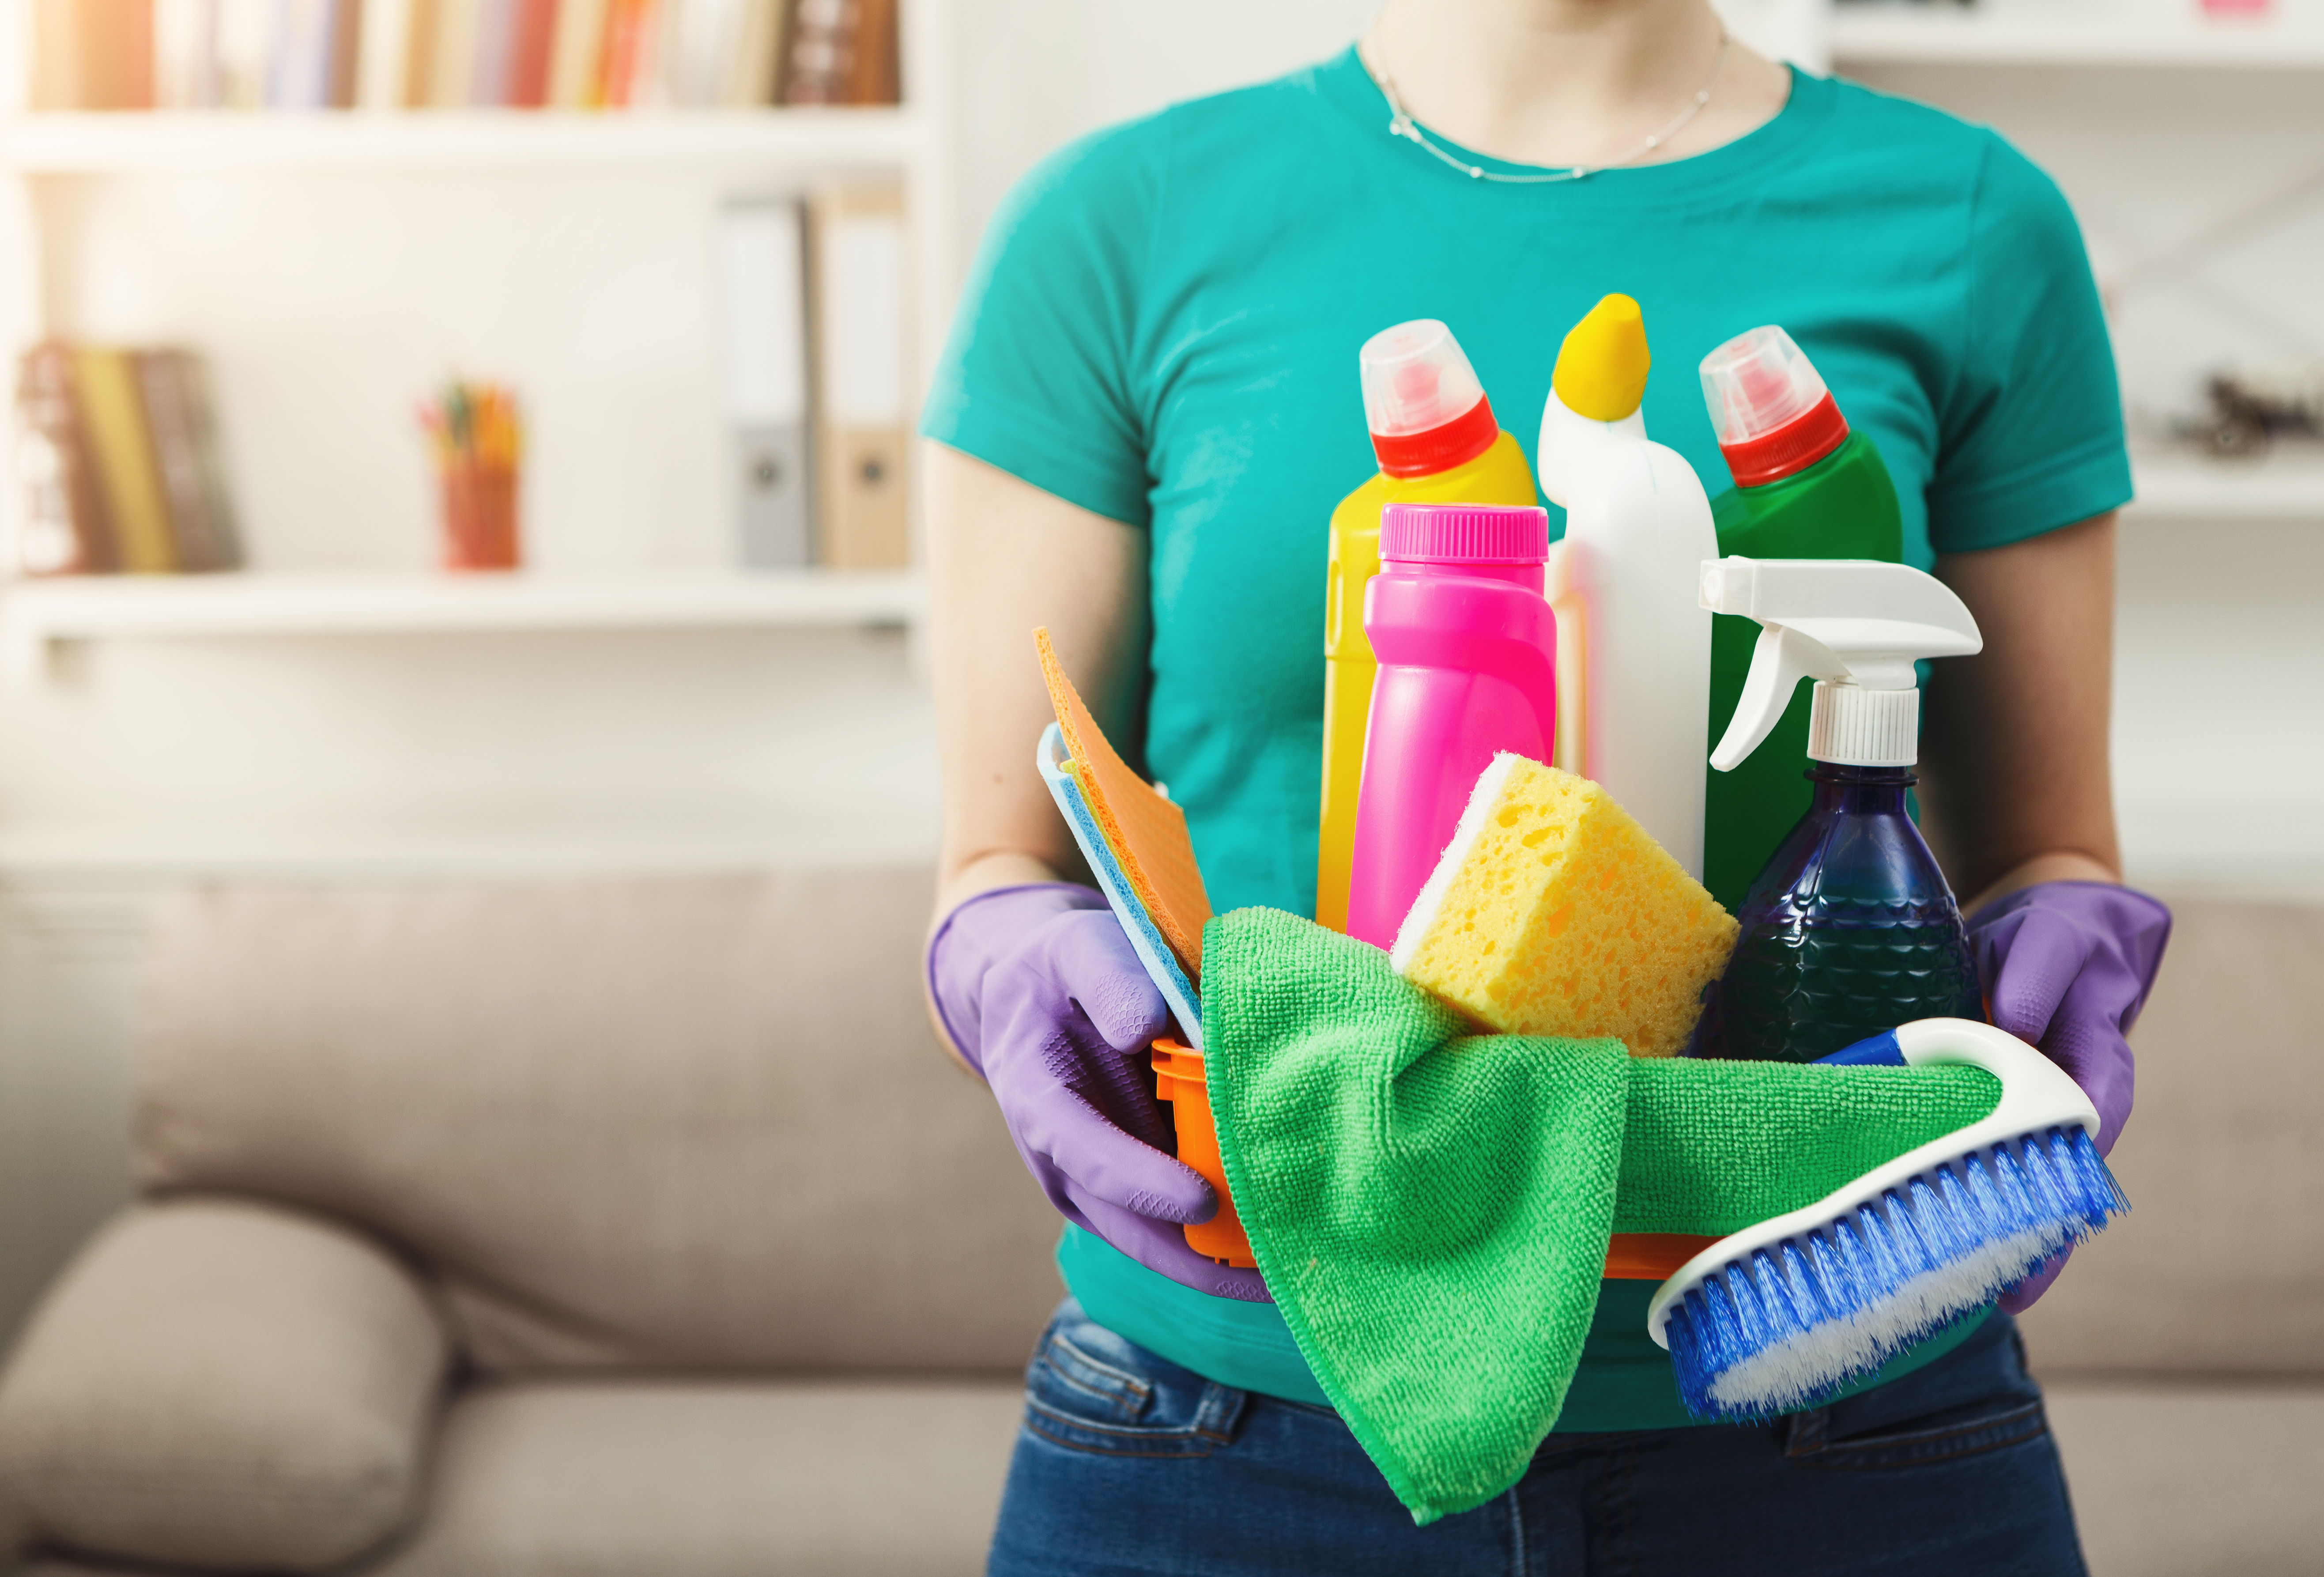 Clean and tidy. Уборка в косметике. Cleaning Supplies. Cleaning materials for Home. Tidy House Cleaning service.